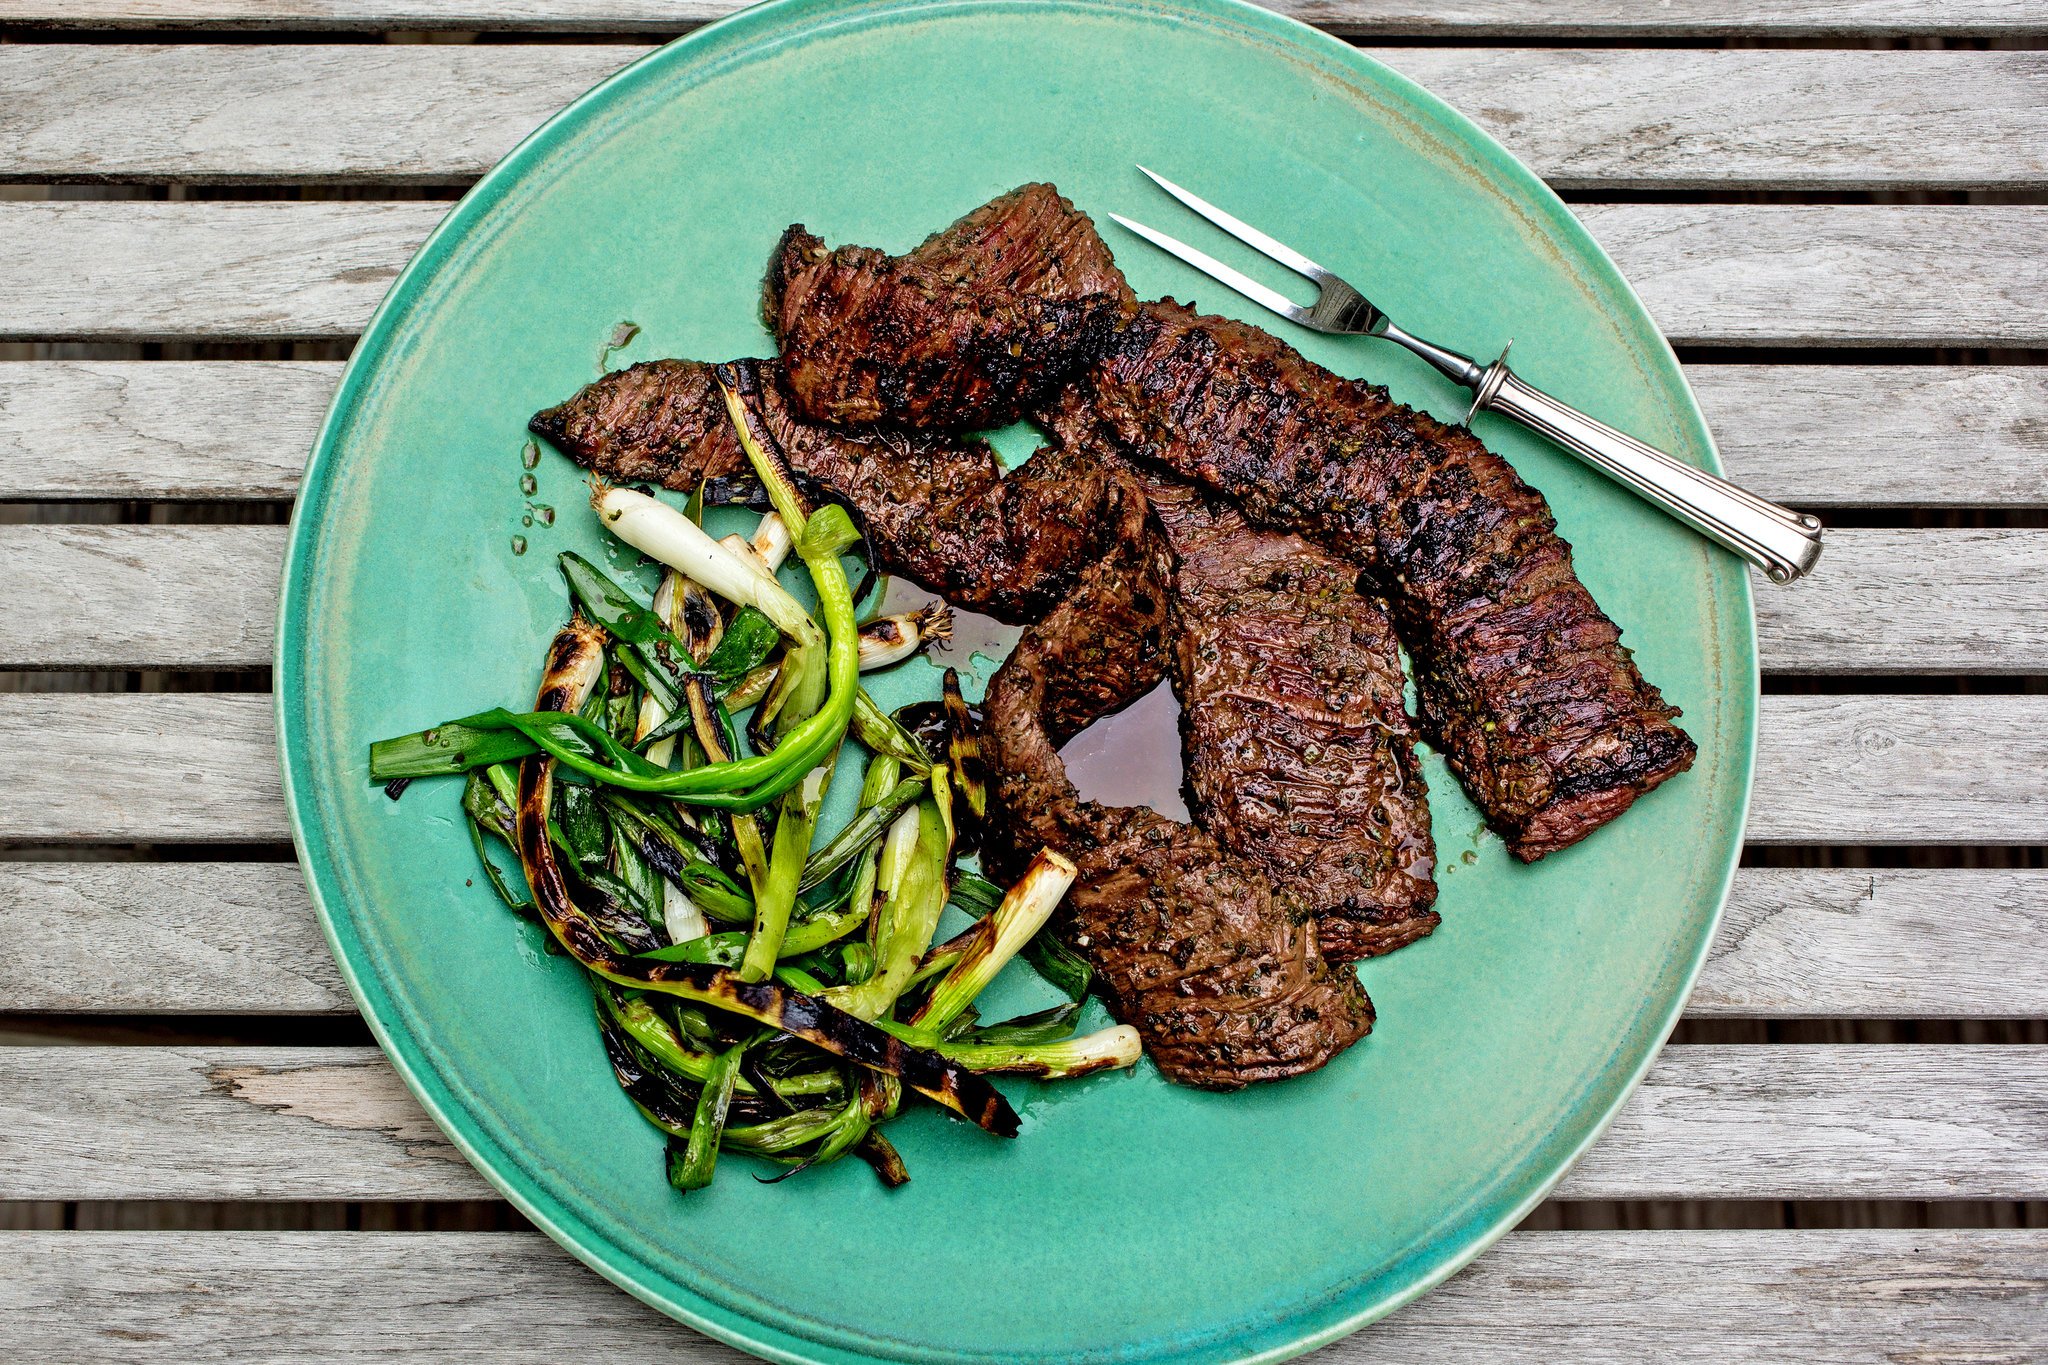 Grilled Skirt Steak With Garlic and Herbs Recipe